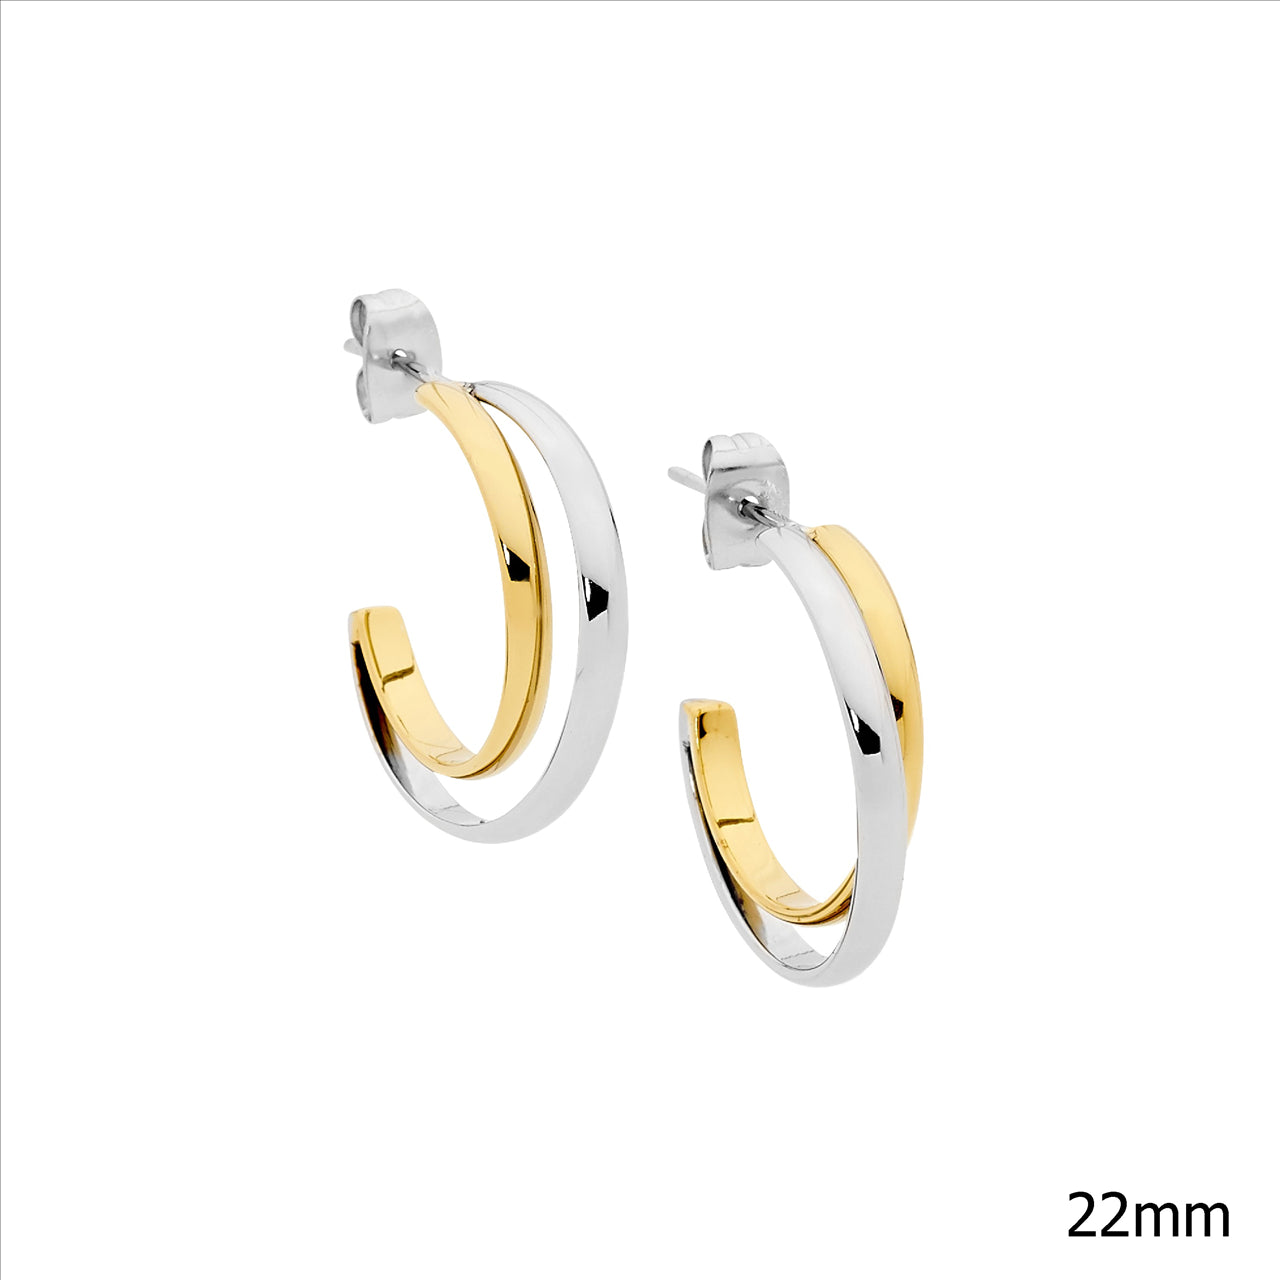 Stainless Steel/Yellow Gold Double Row 3/4 Hoops